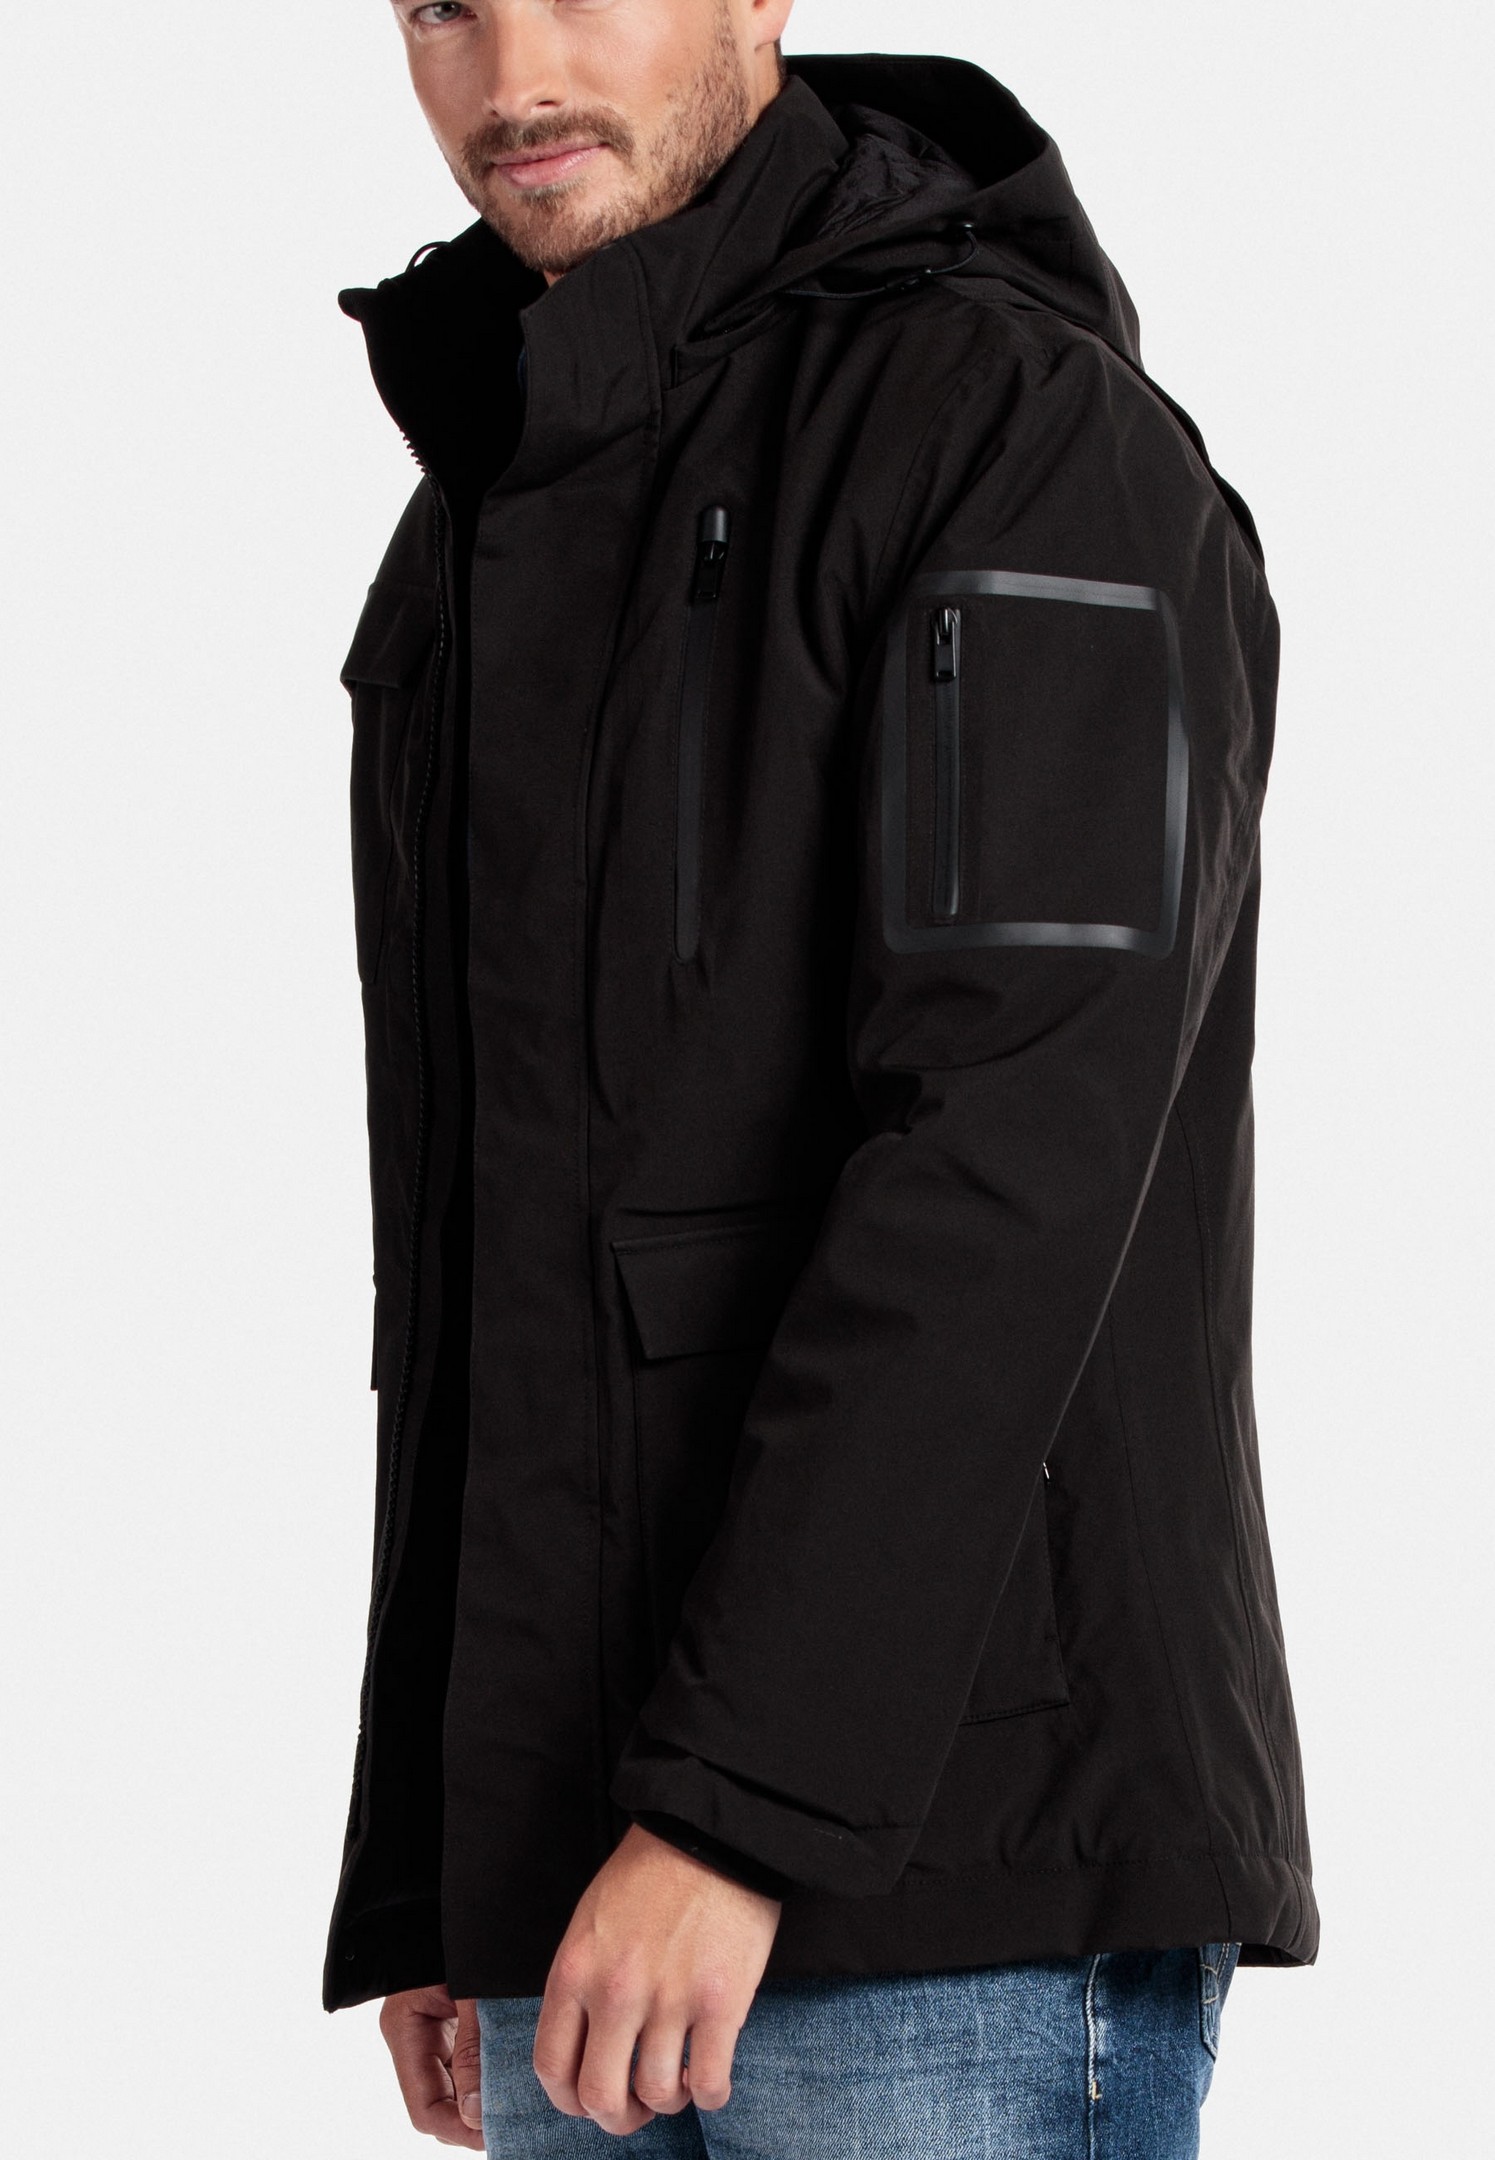 Giordano Jacket Removable Hood Water and Windproof Dark Navy | Jan Rozing  Men's Fashion